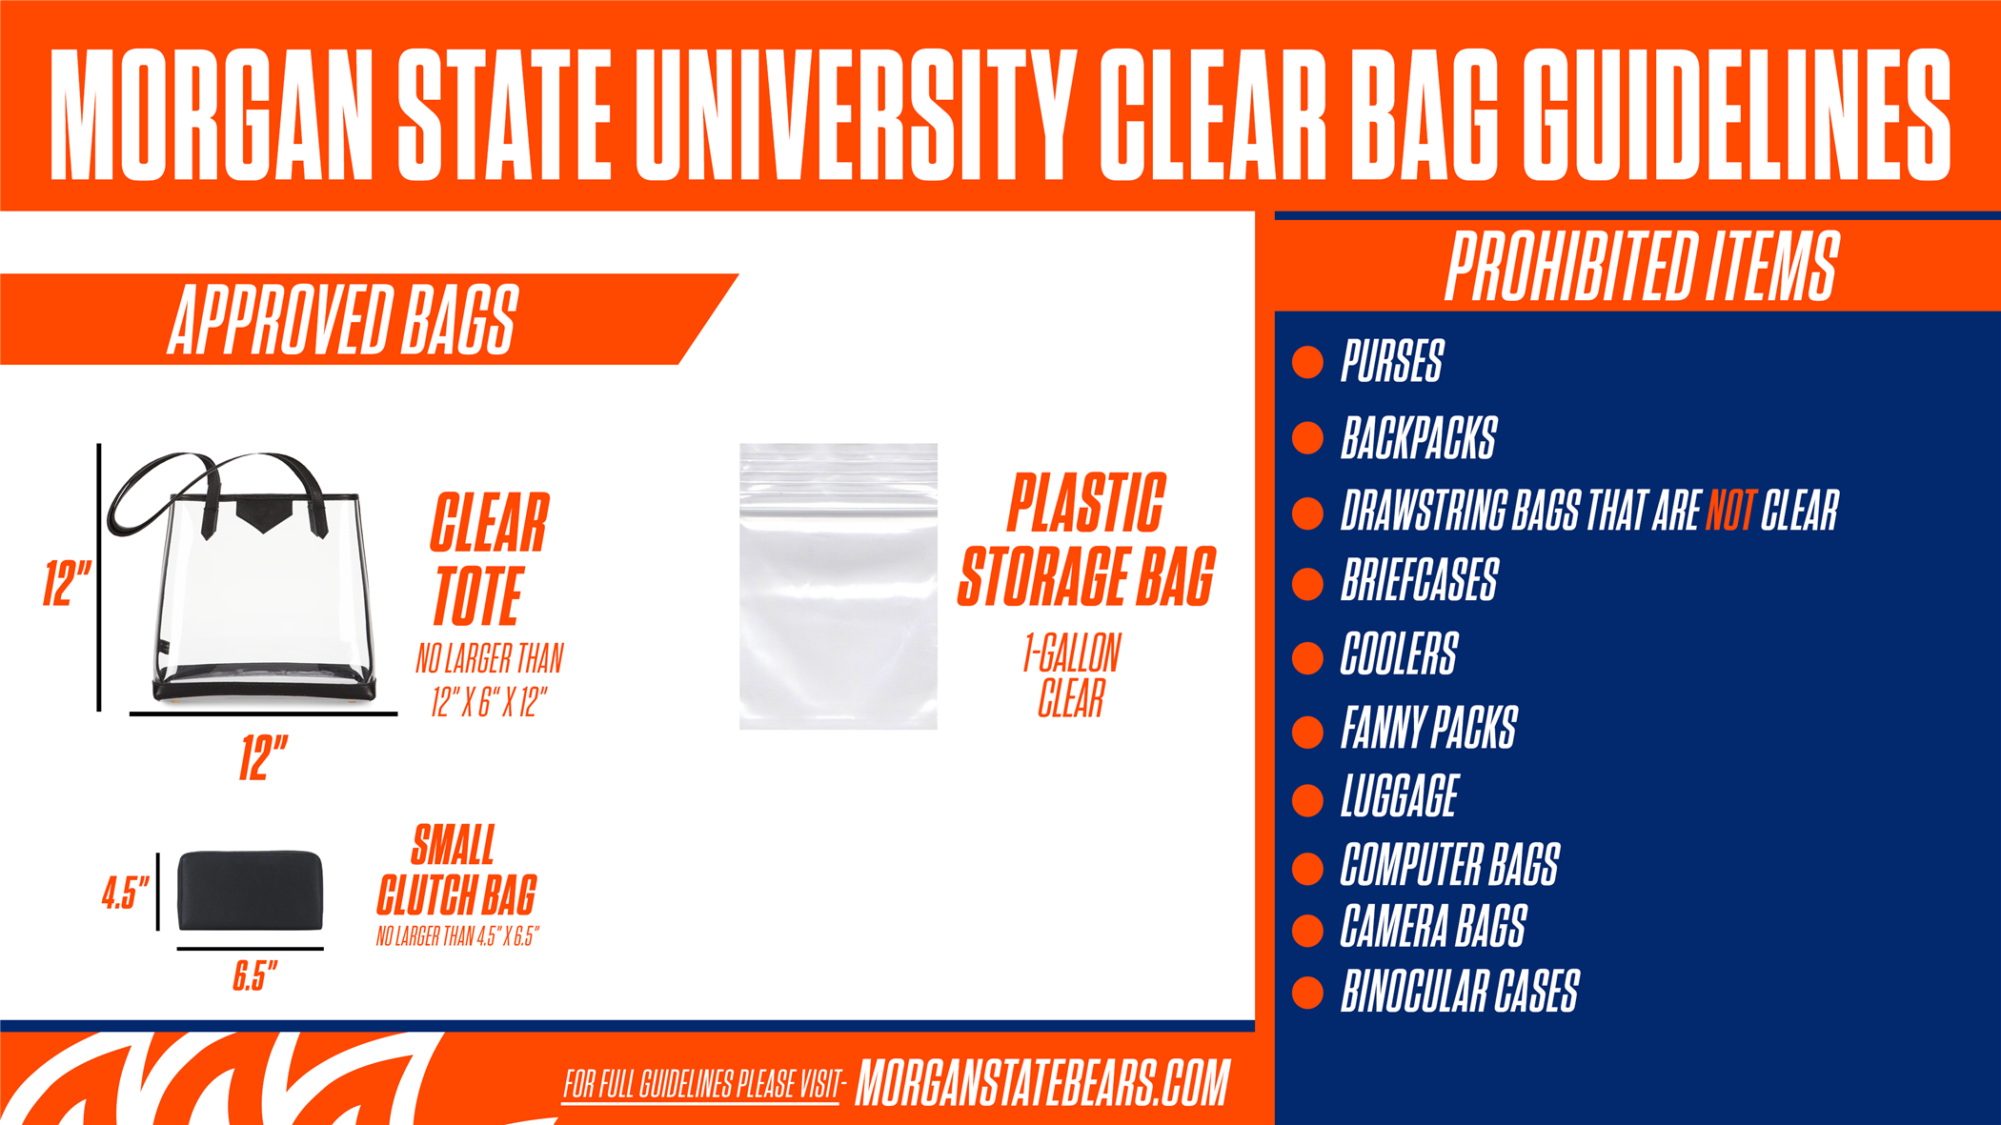 MSU To Implement Clear Bag Policy At The Hump Starting Jan. 2 - Mississippi  State